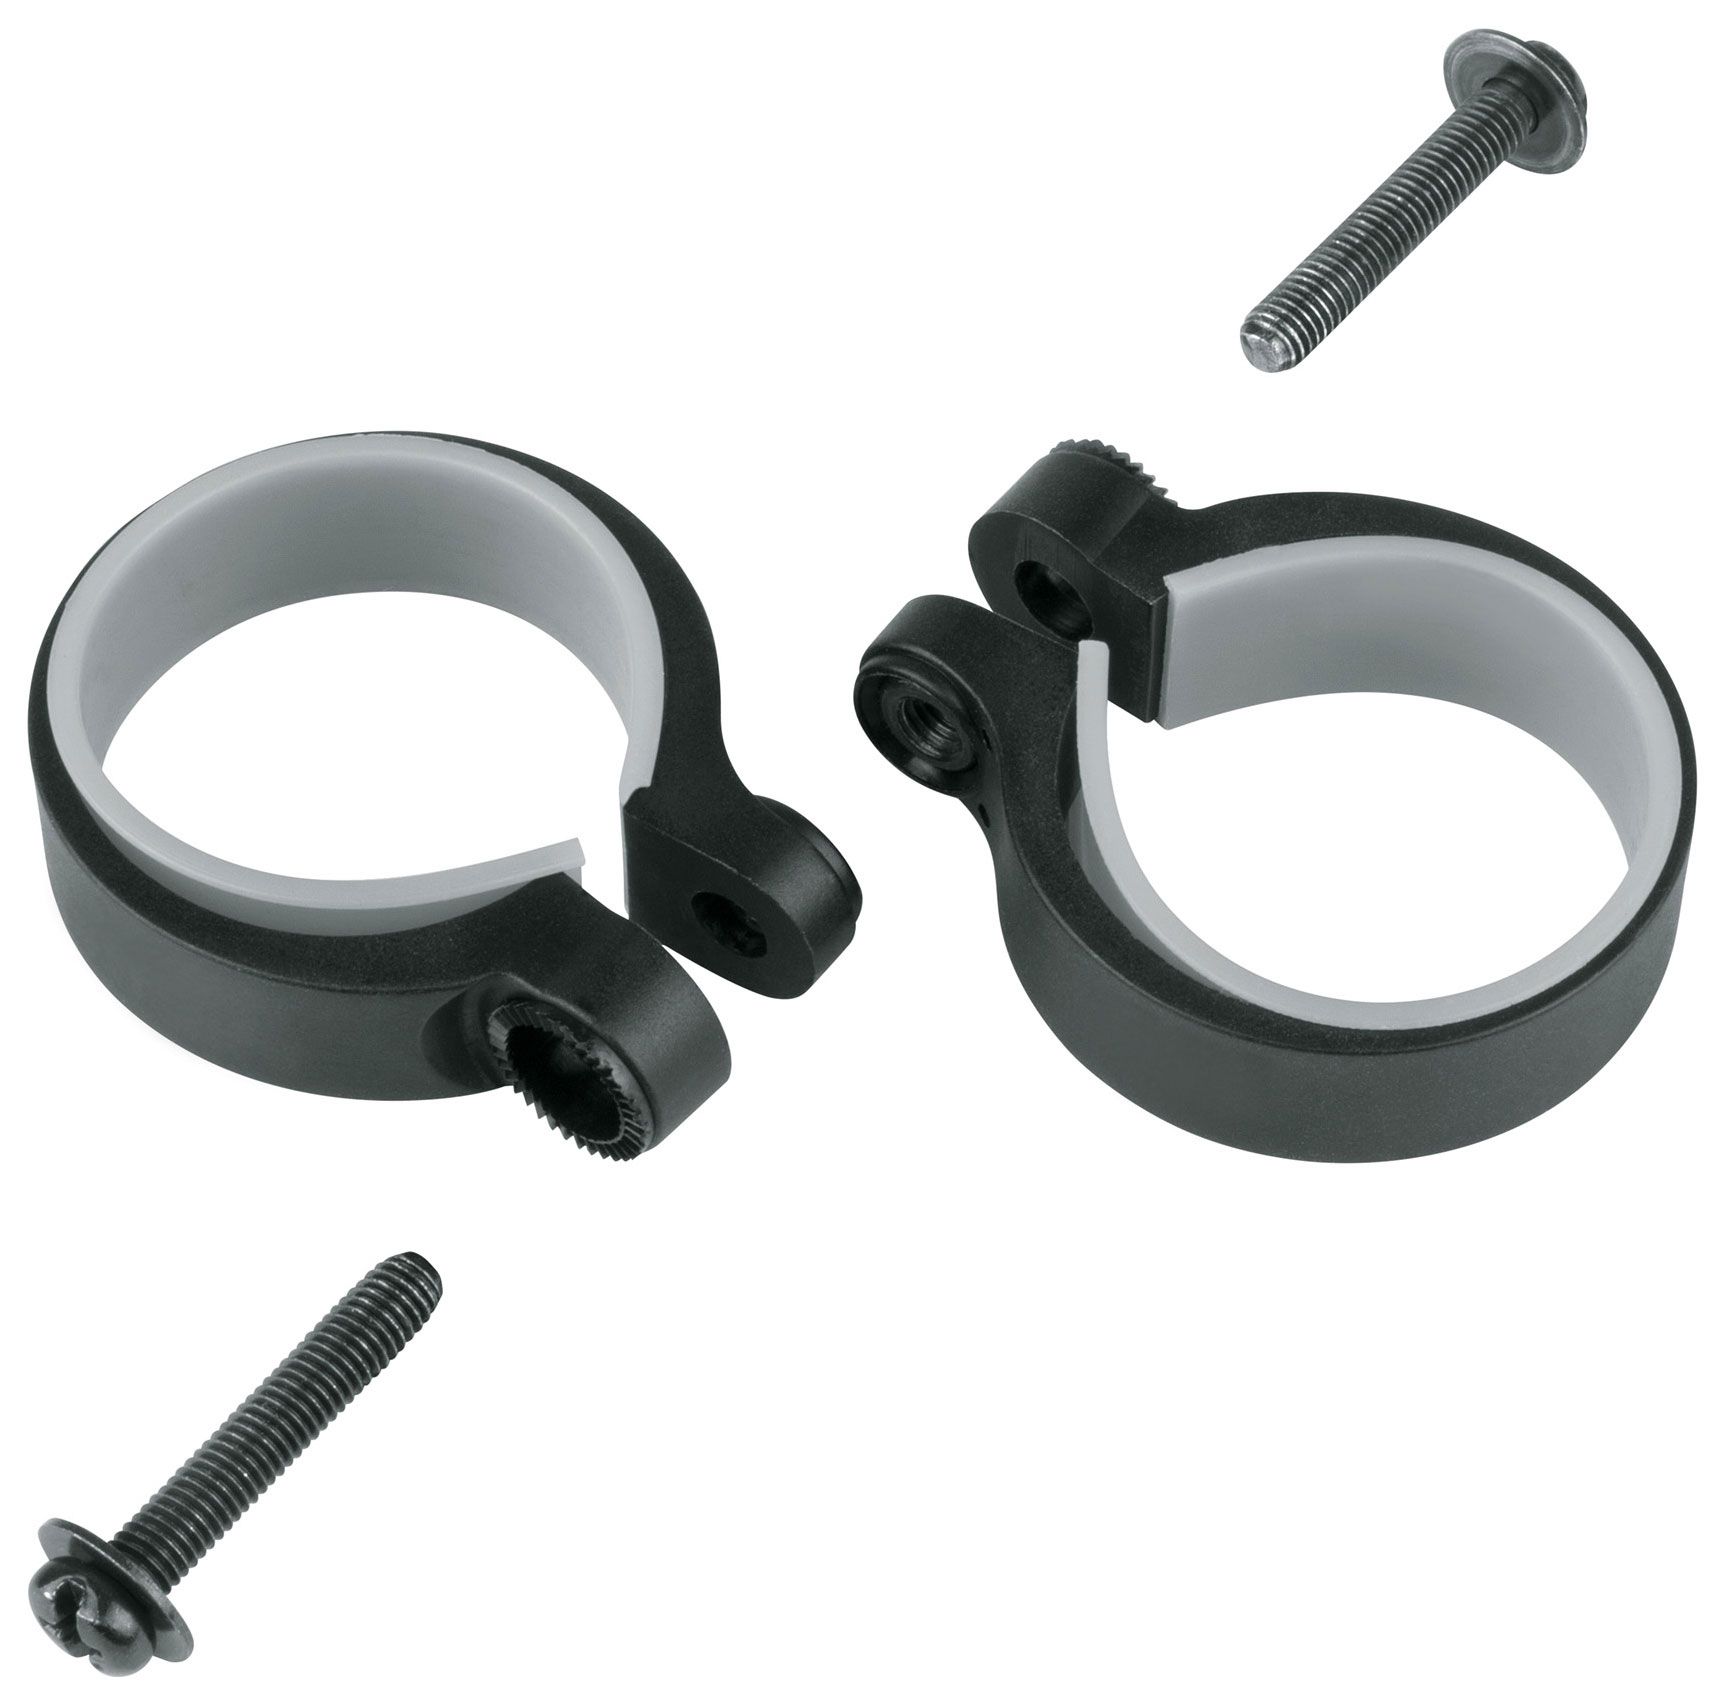  Хомут для велосипеда SKS Stay Mounting Clamps 2 Pcs. 34,5 - 37,5Mm (SKS-11484)